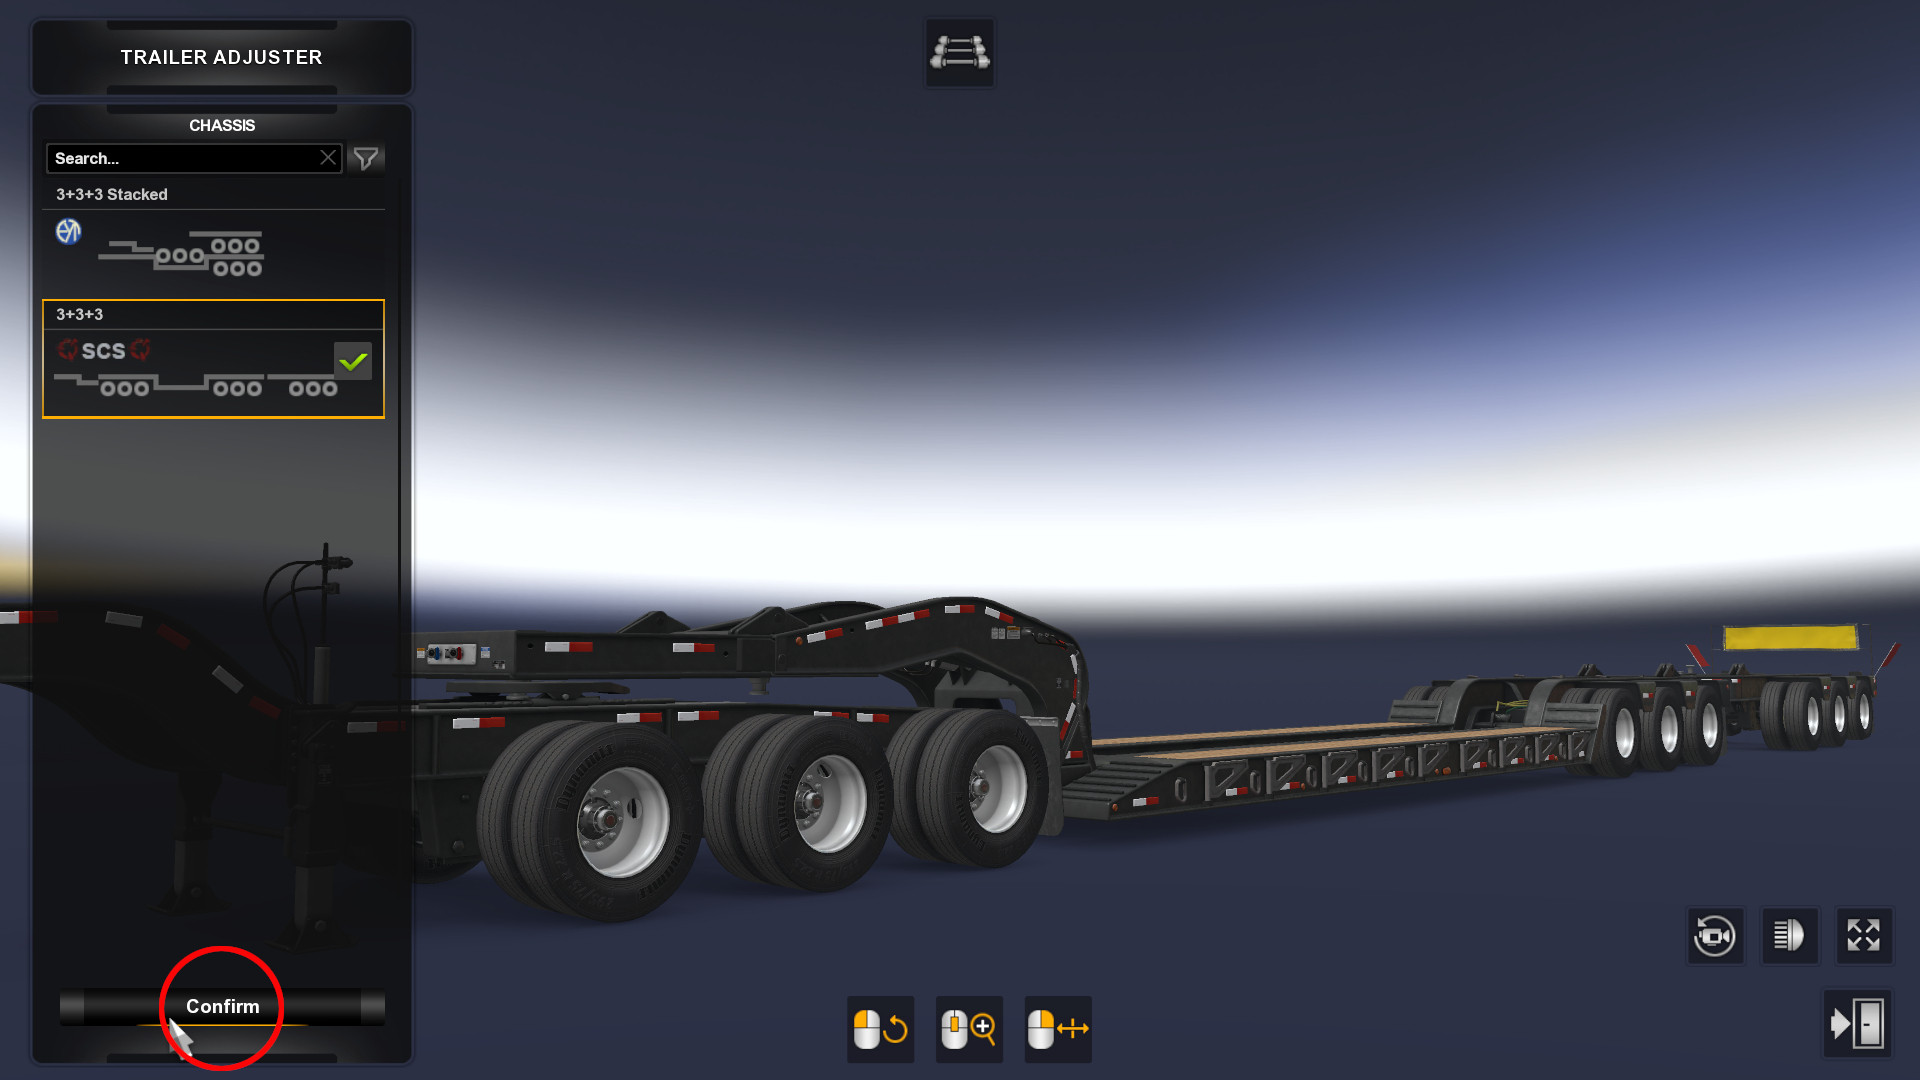 Stacked SCS Lowboy Trailers.